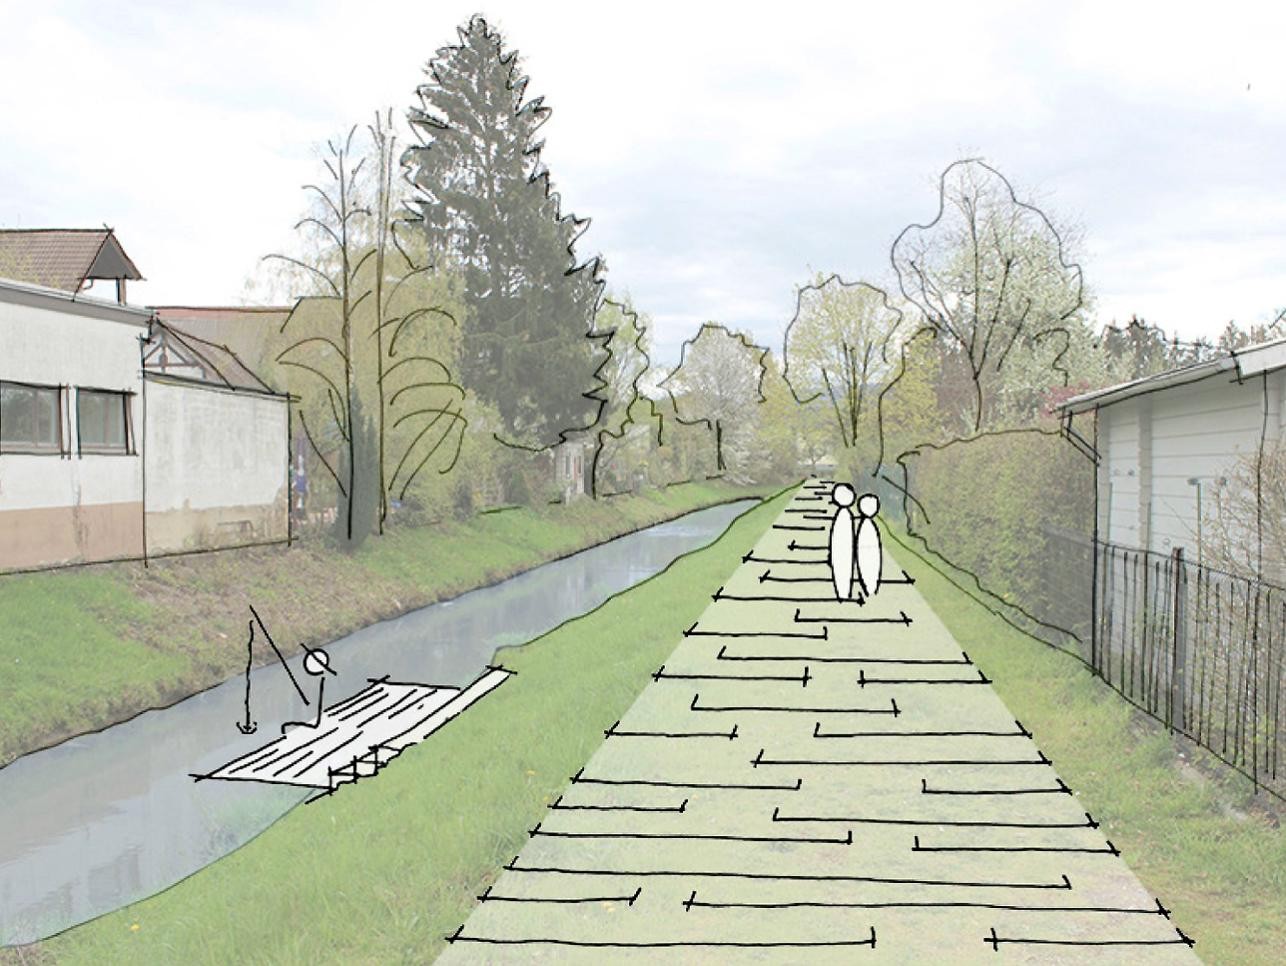 Drawing of planned path at Ooser Landgraben in Niederbühl with brook, bank, people and houses